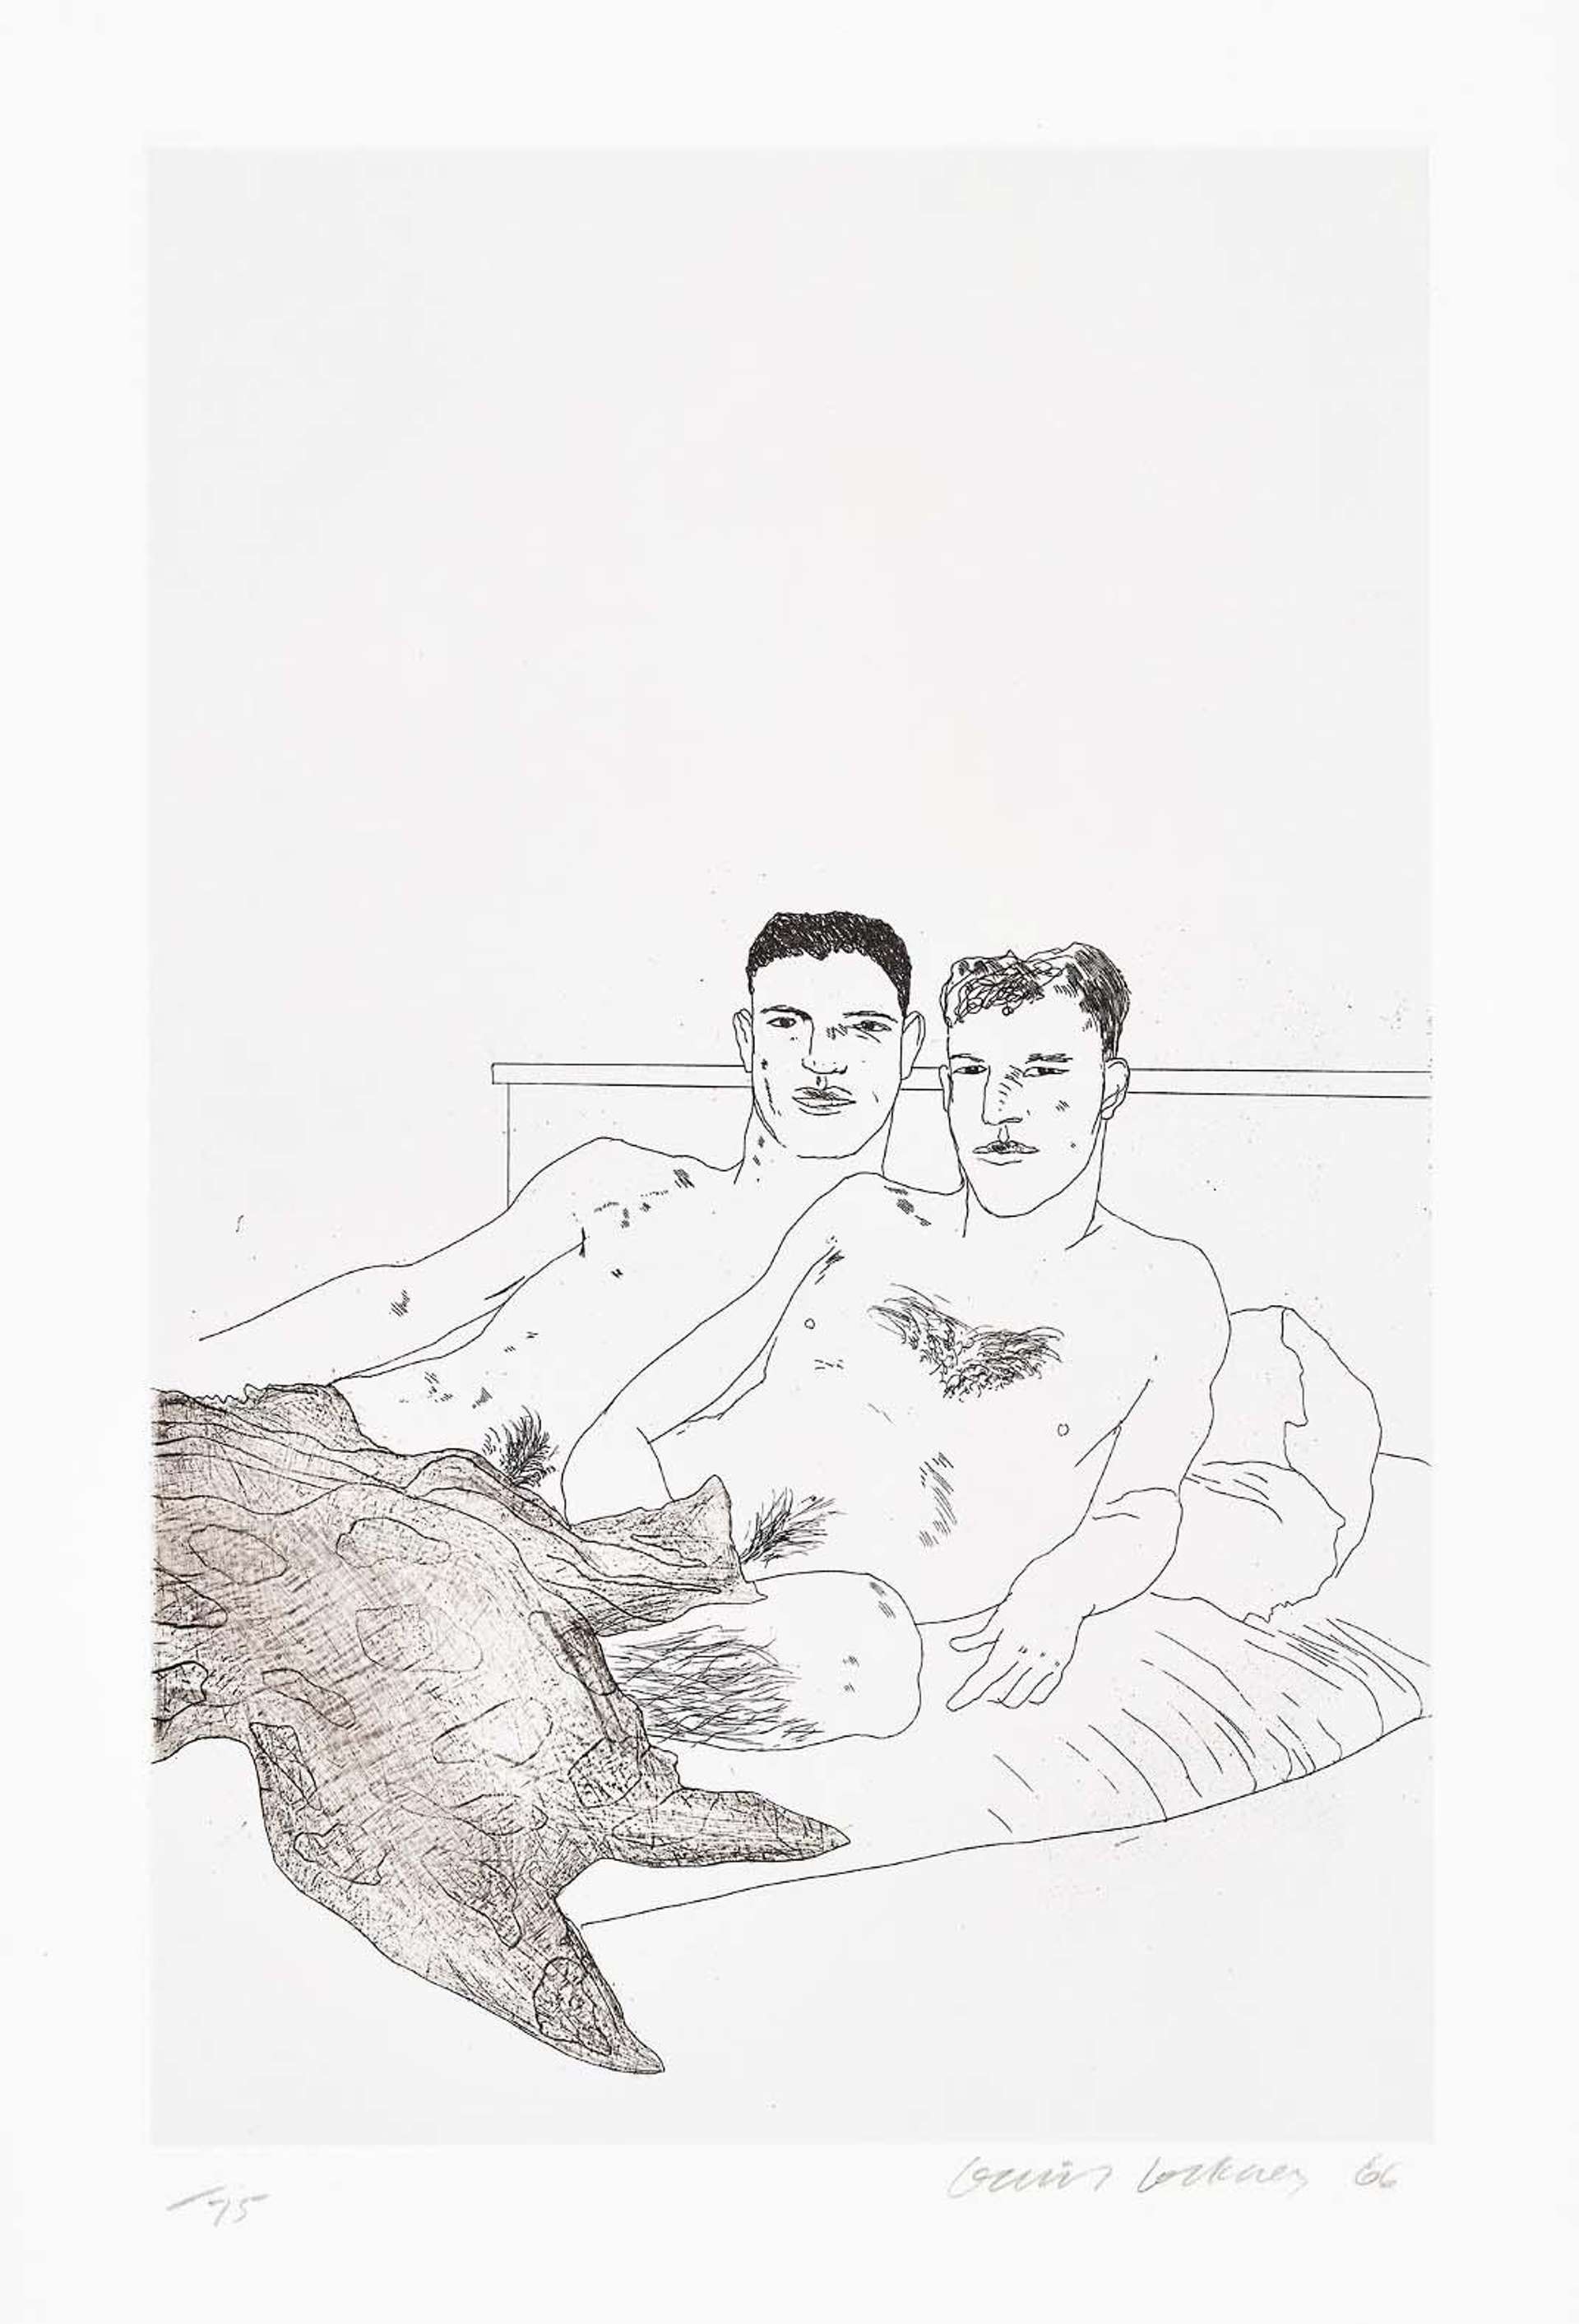 David Hockney’s The Beginning. An etching print of two nude men lying next to each other sitting upright in bed.